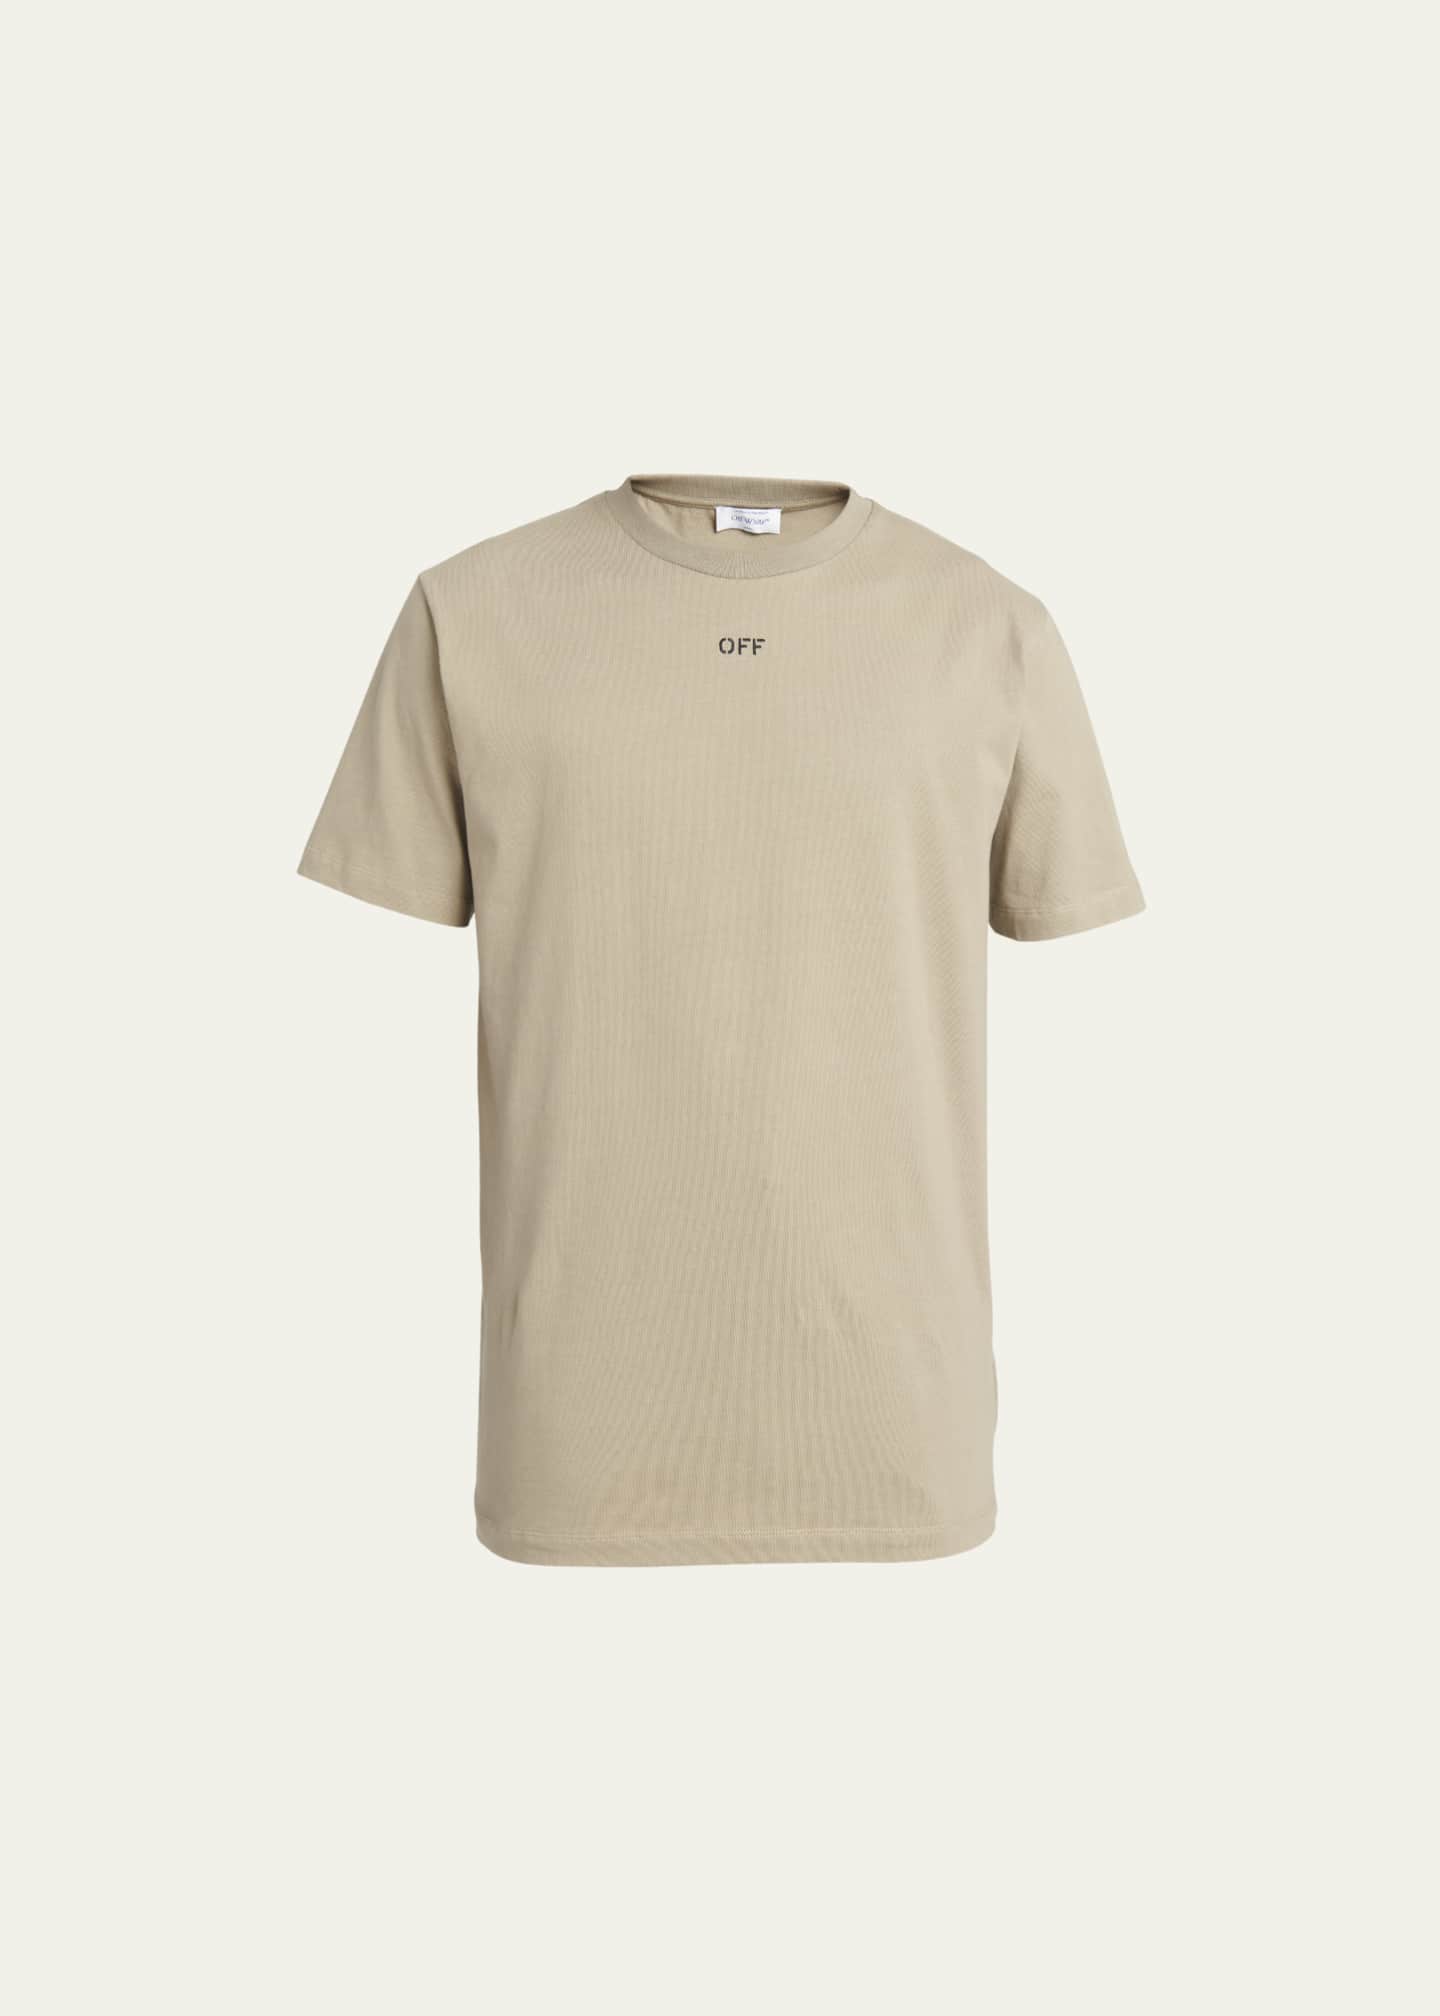 OFF STITCH SLIM S/S TEE on Sale - Off-White™ Official BH